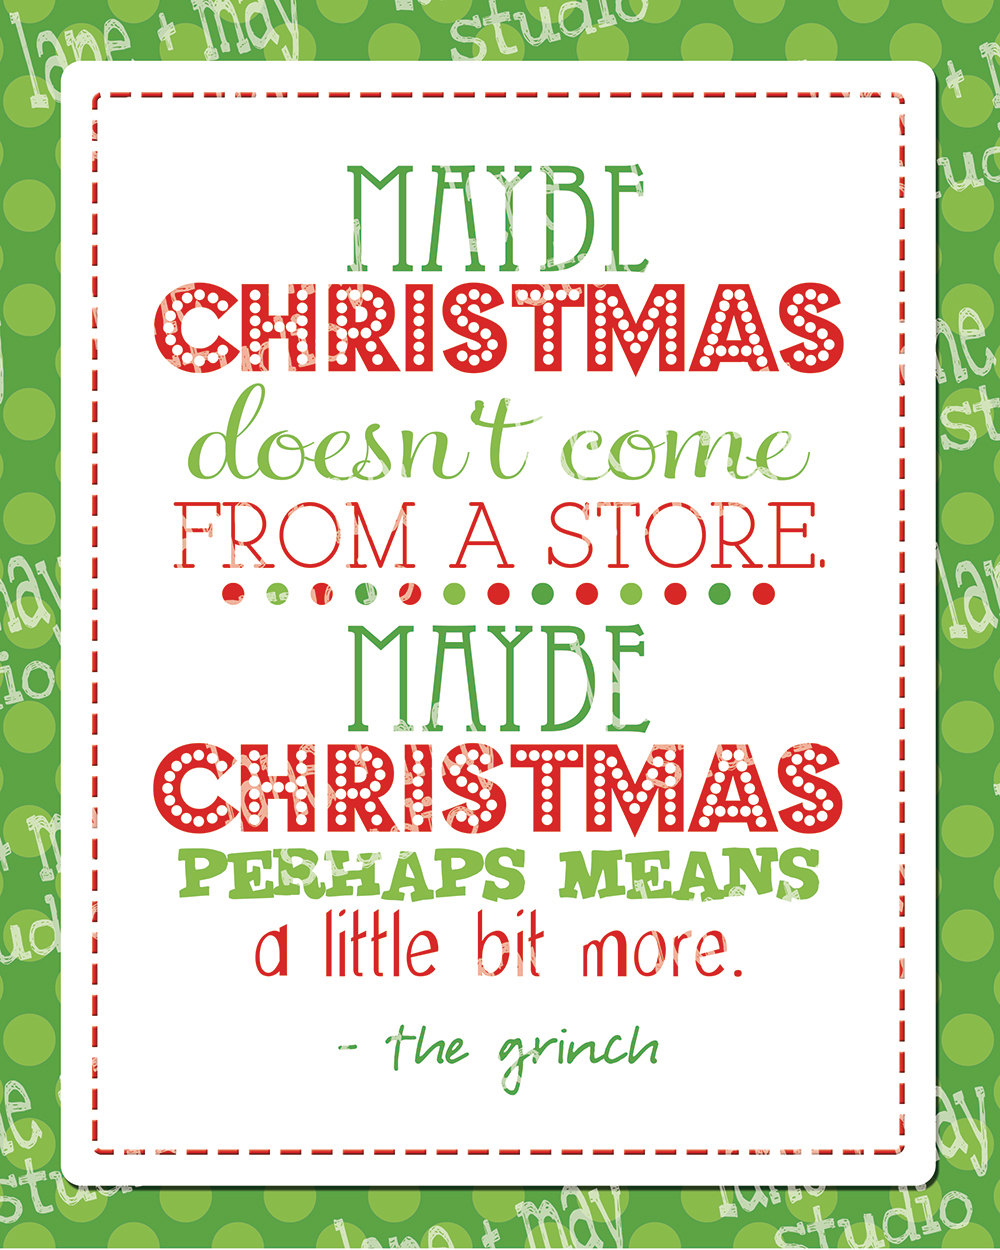 the grinch quotes